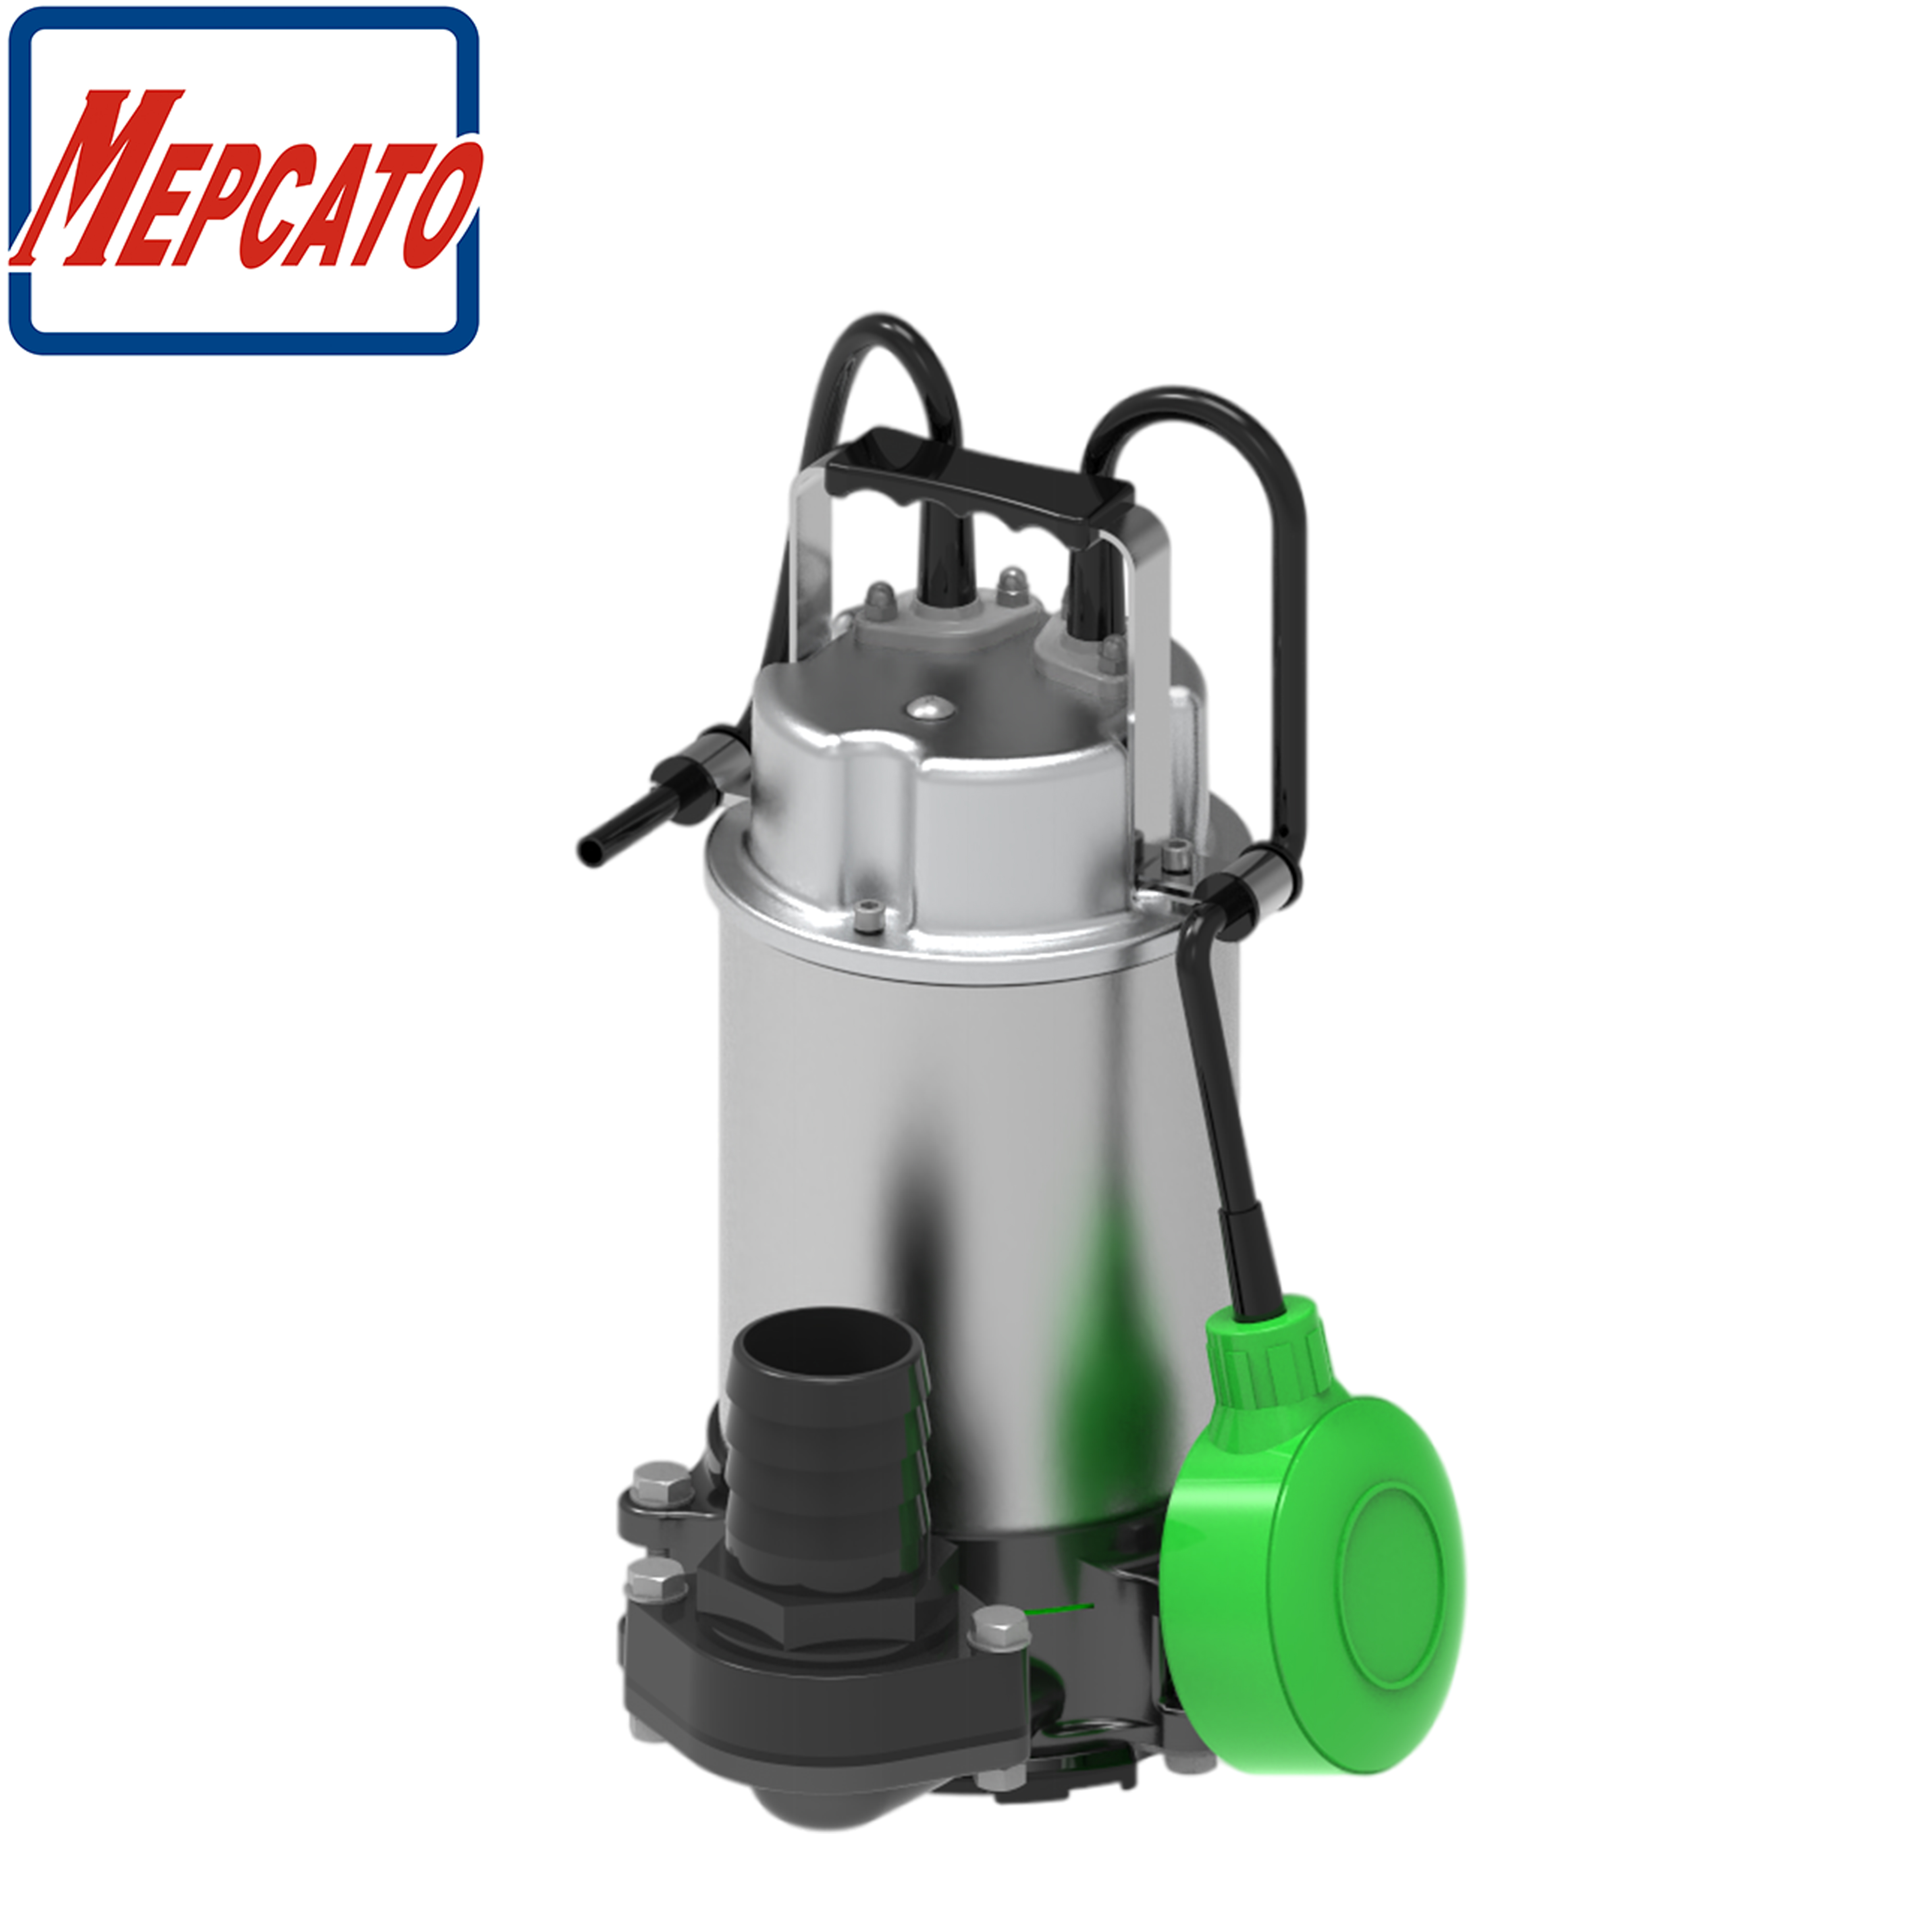 1mm Residual Water Drainage Pump with Floater